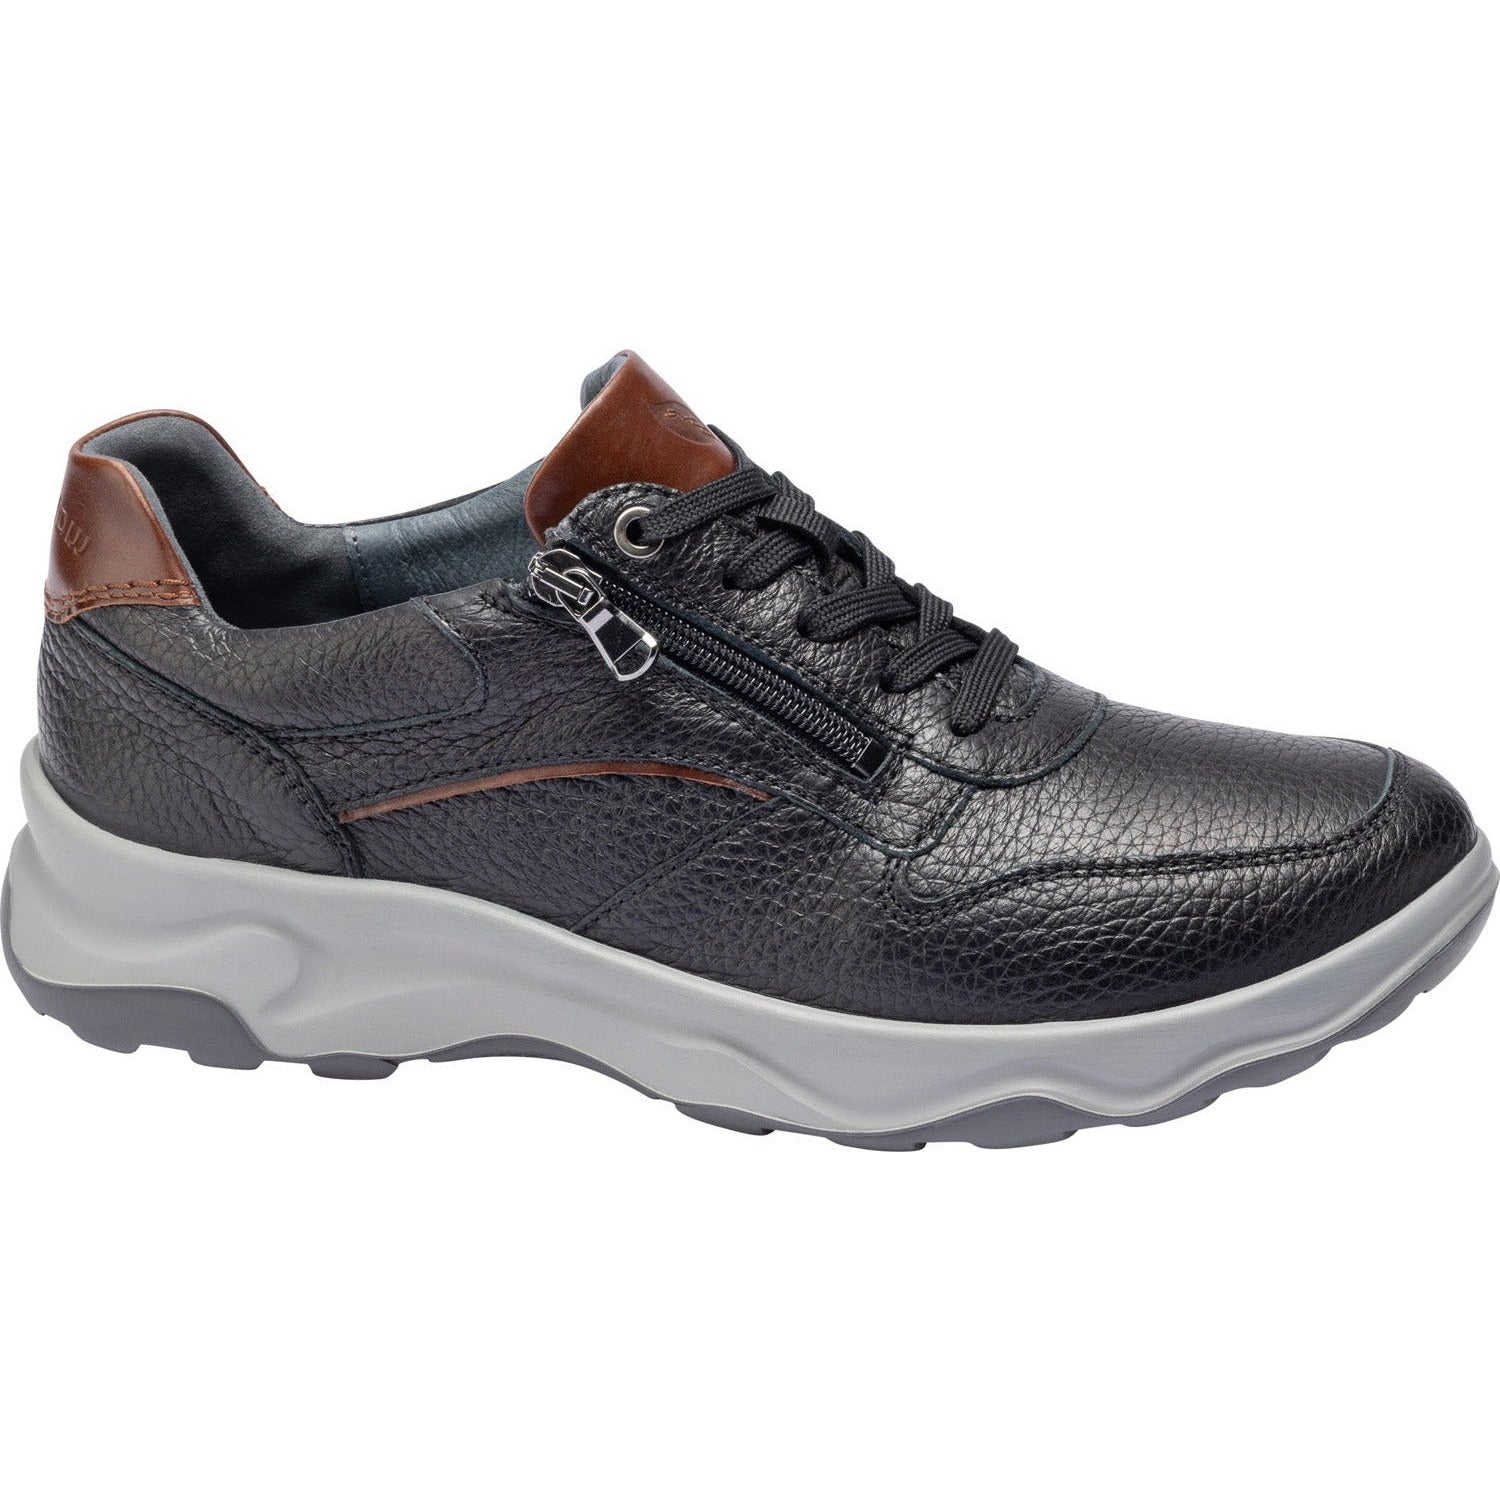 Waldlaufer H-Max (718007) - Mens Lace up with Zip Shoe -Wide Fit .Waldlaufer  | Wide Fit Shoes | Wisemans | Bantry | West Cork | Ireland